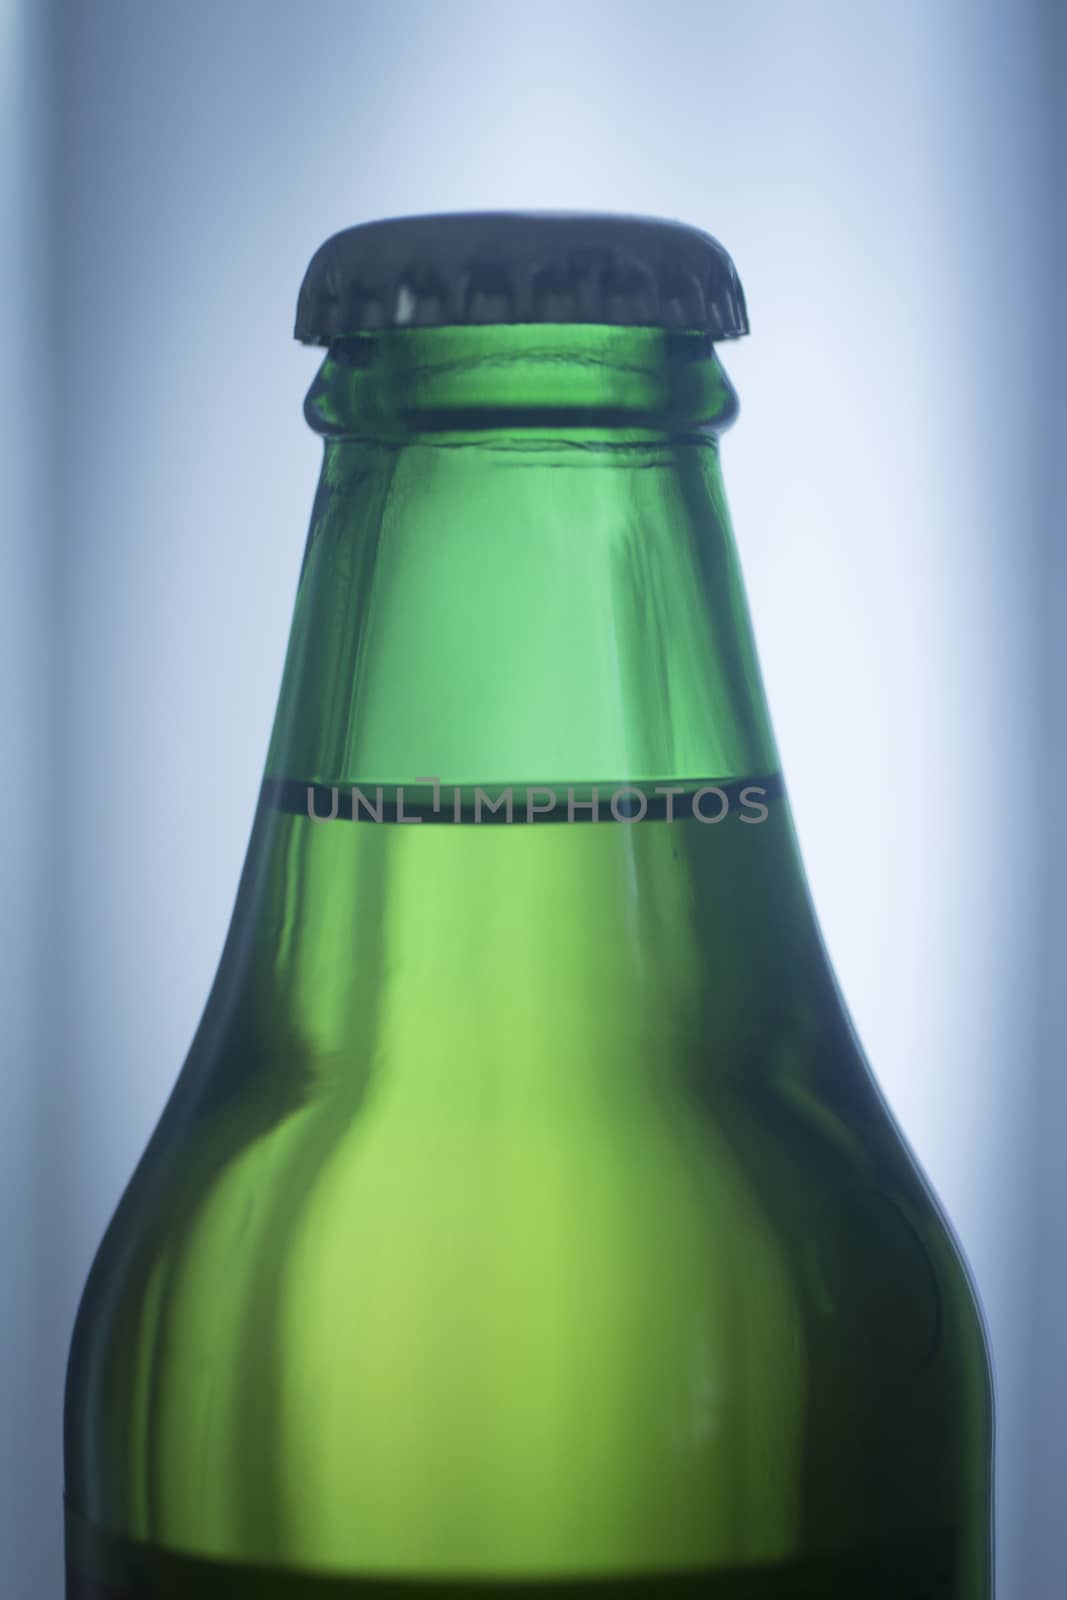 Isolated 200ml small glass Asturian Spanish apple cider bottle from Asturias Spain on a plain blue studio background close-up photo.